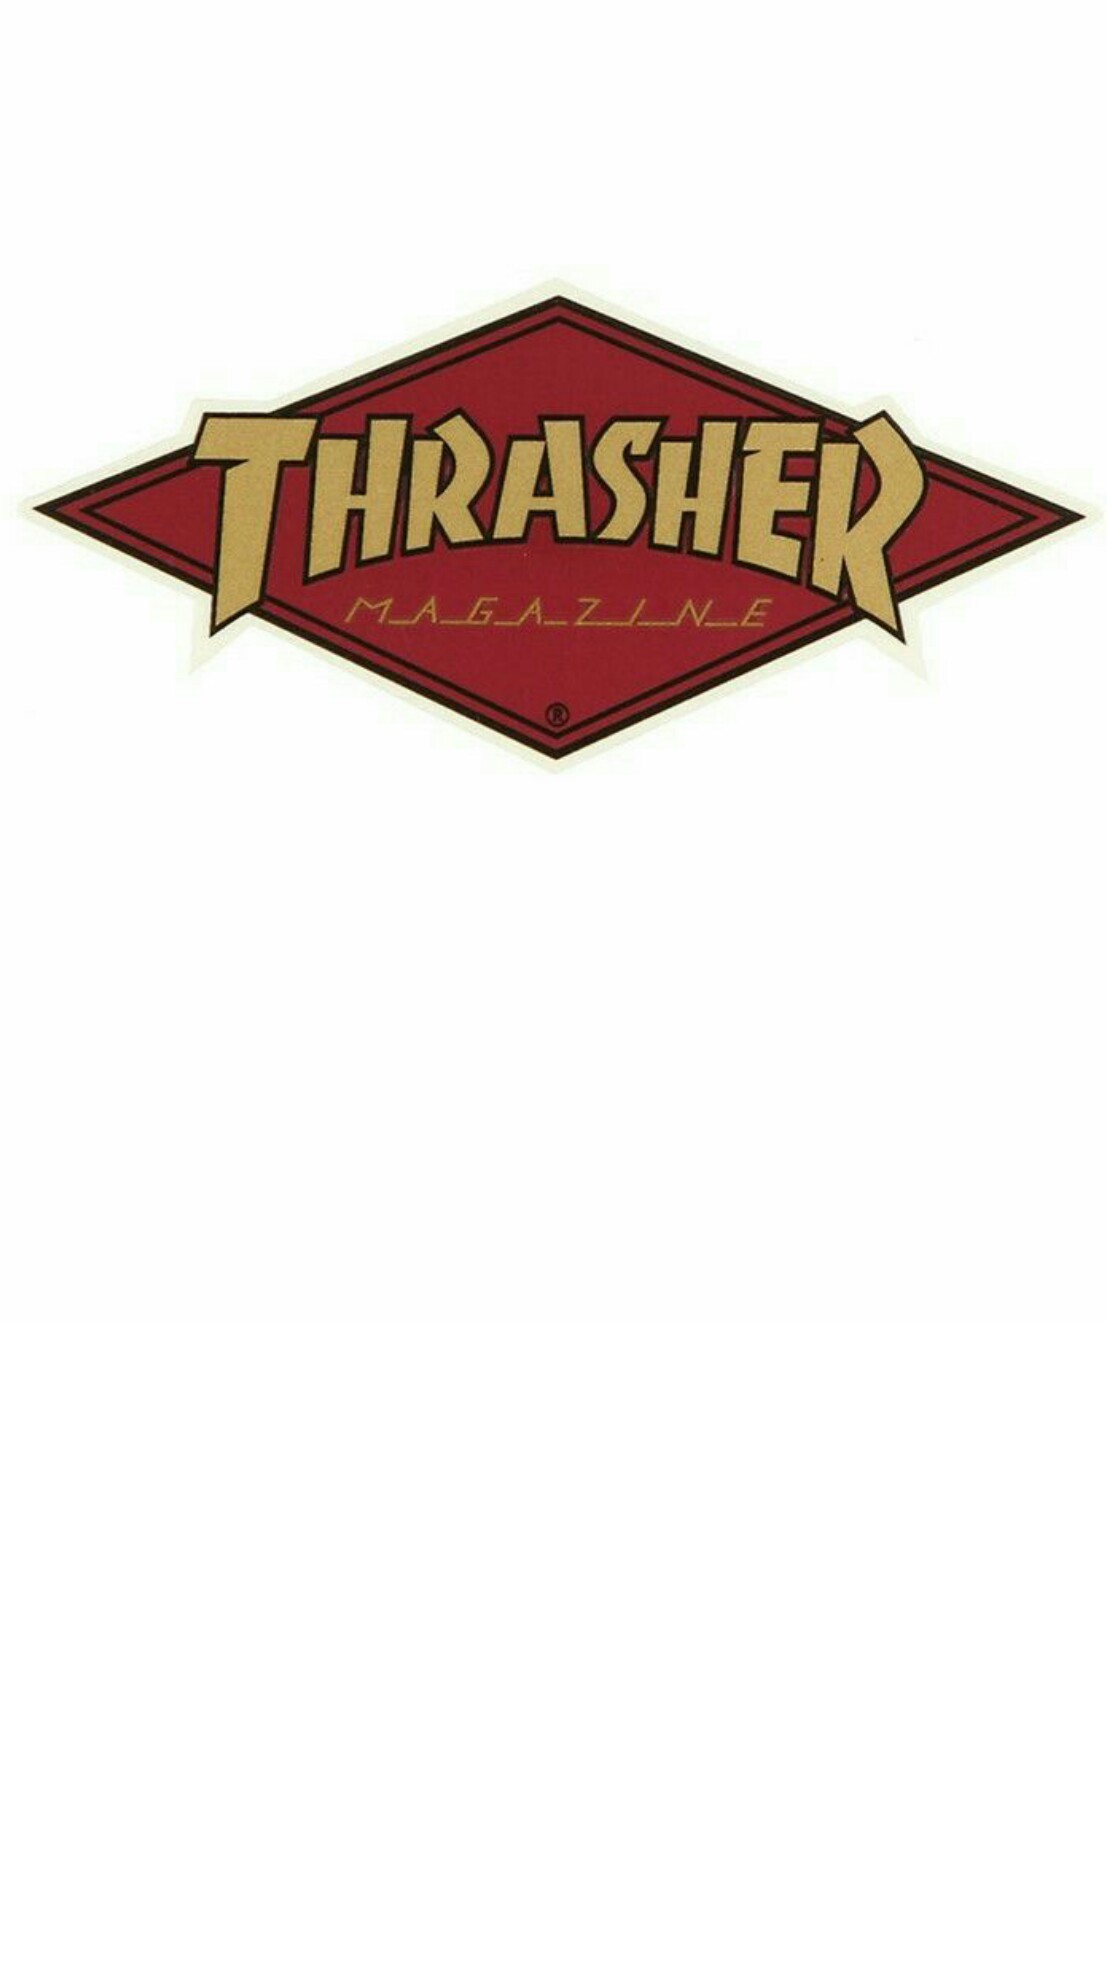 Tommy Hilfiger Iphone Wallpaper - Thrasher Magazine , HD Wallpaper & Backgrounds